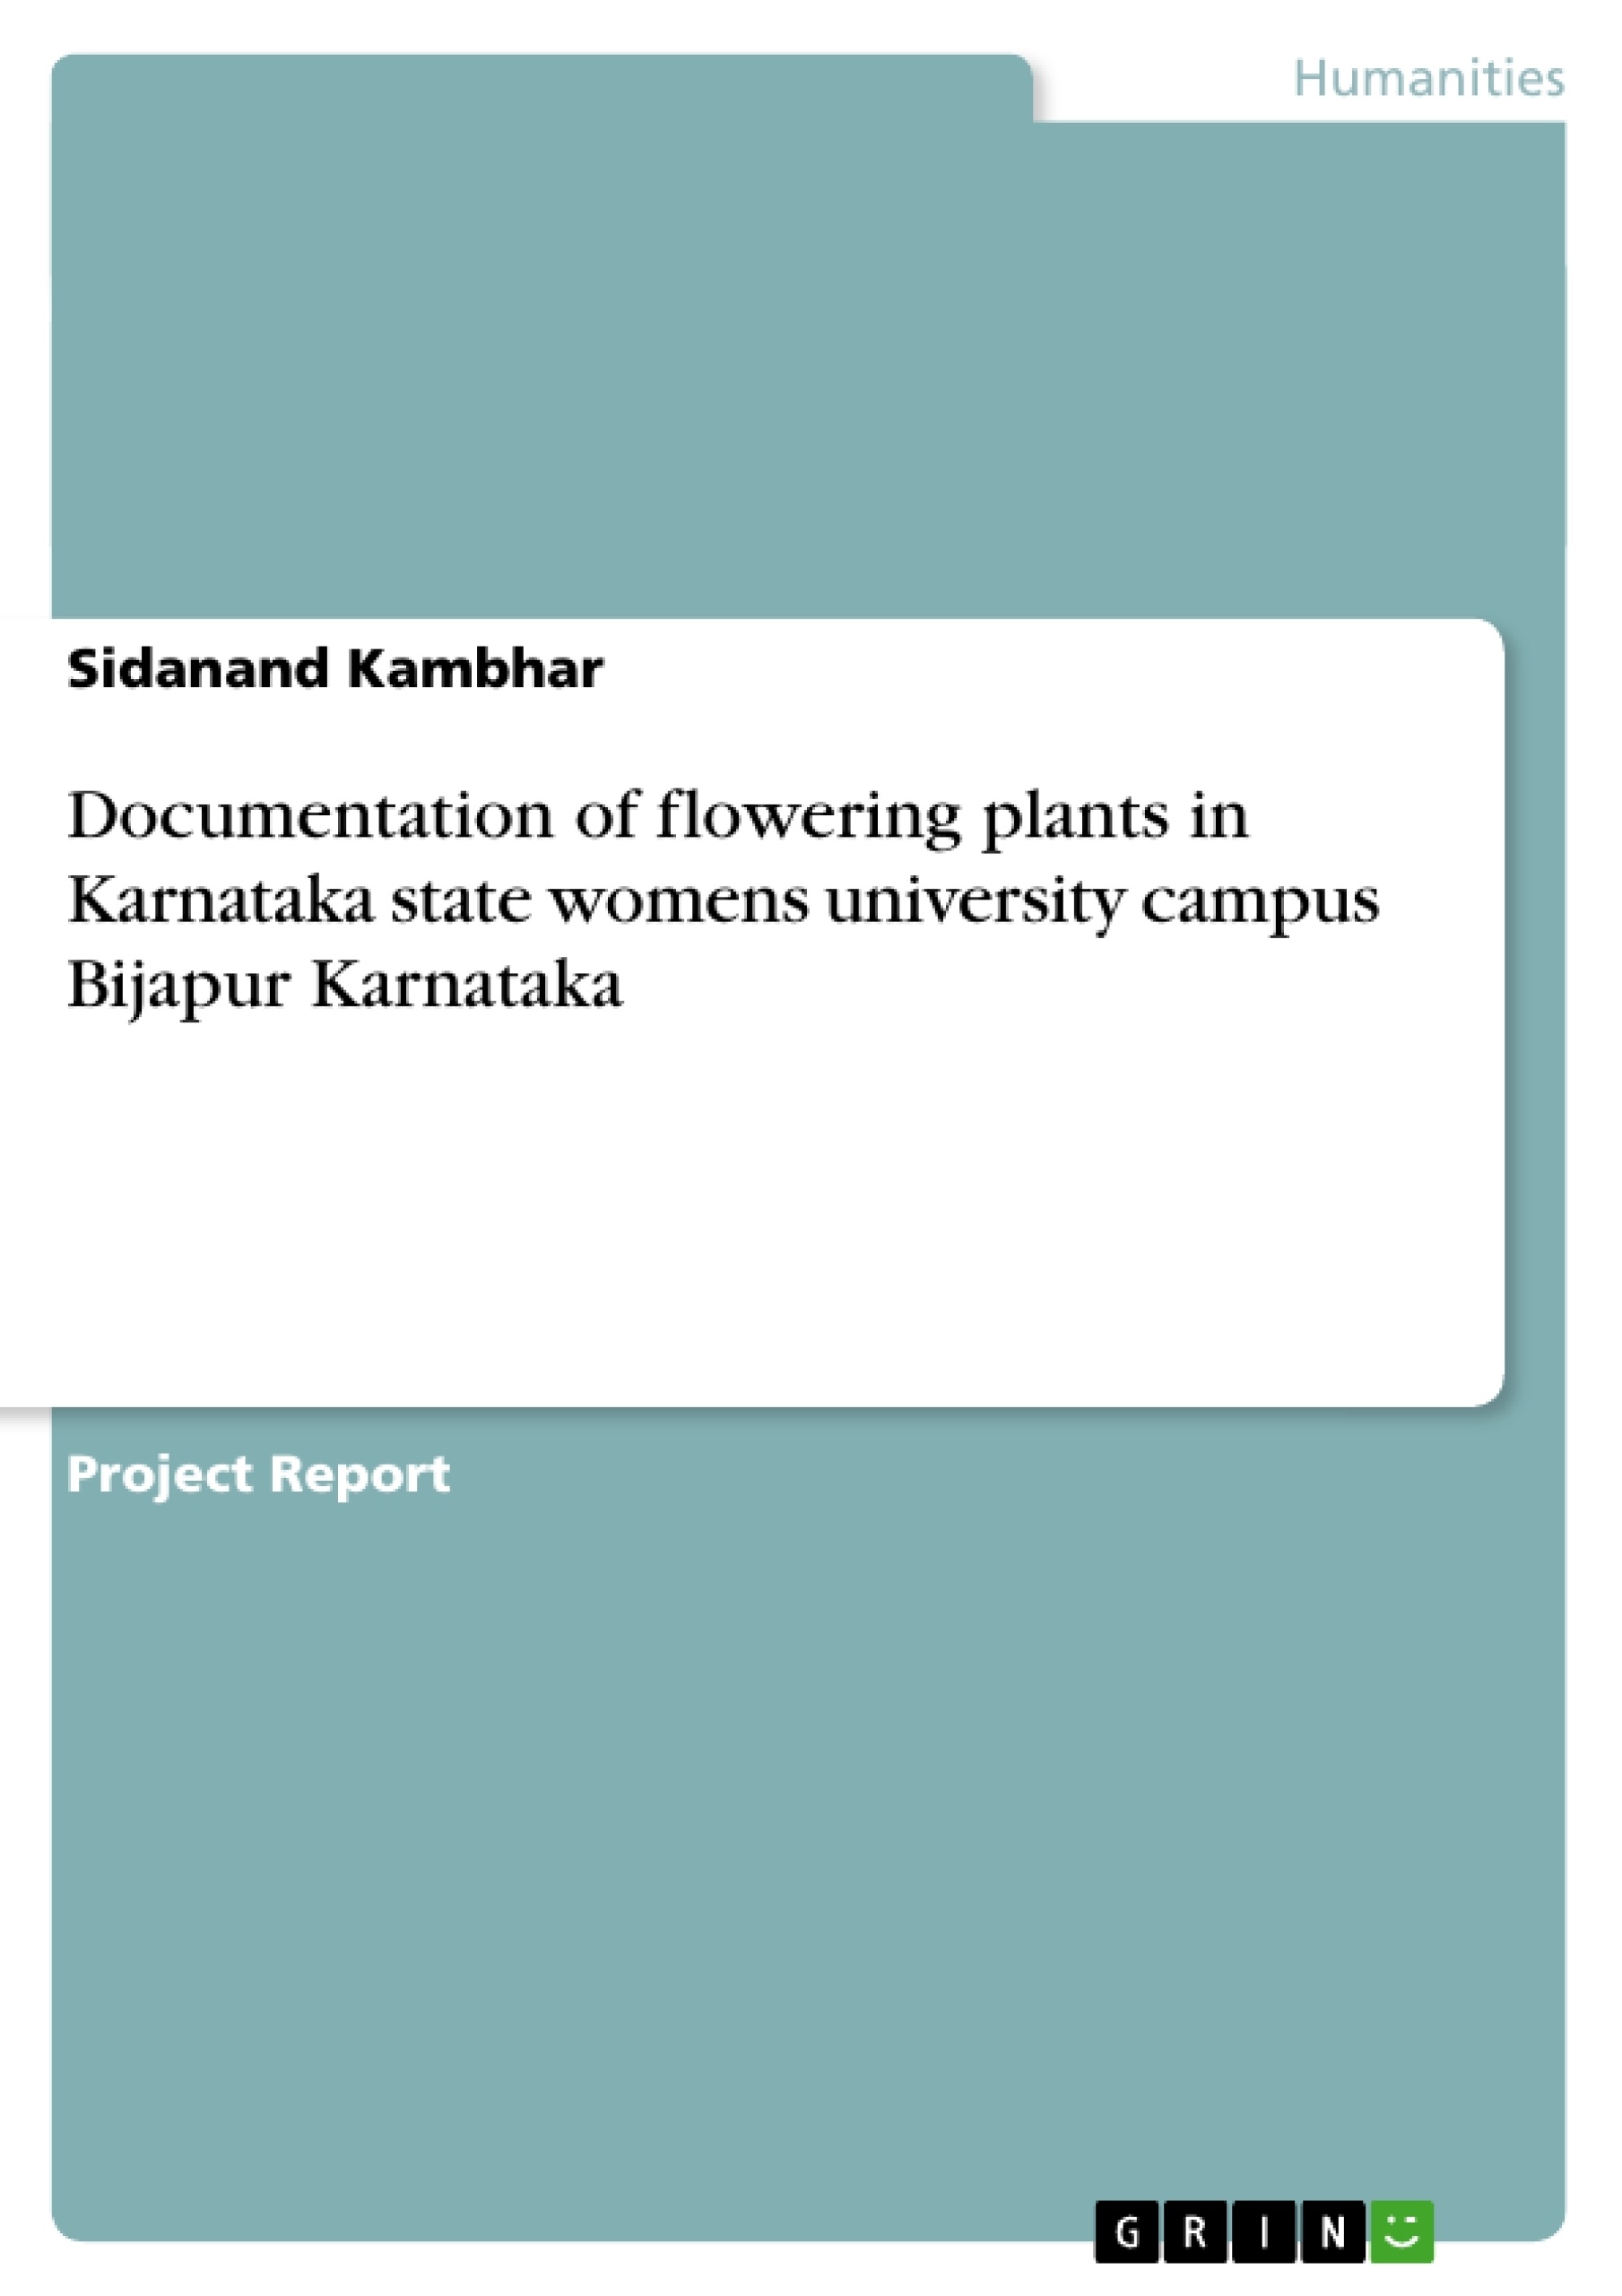 Dharwad agricultural university online thesis